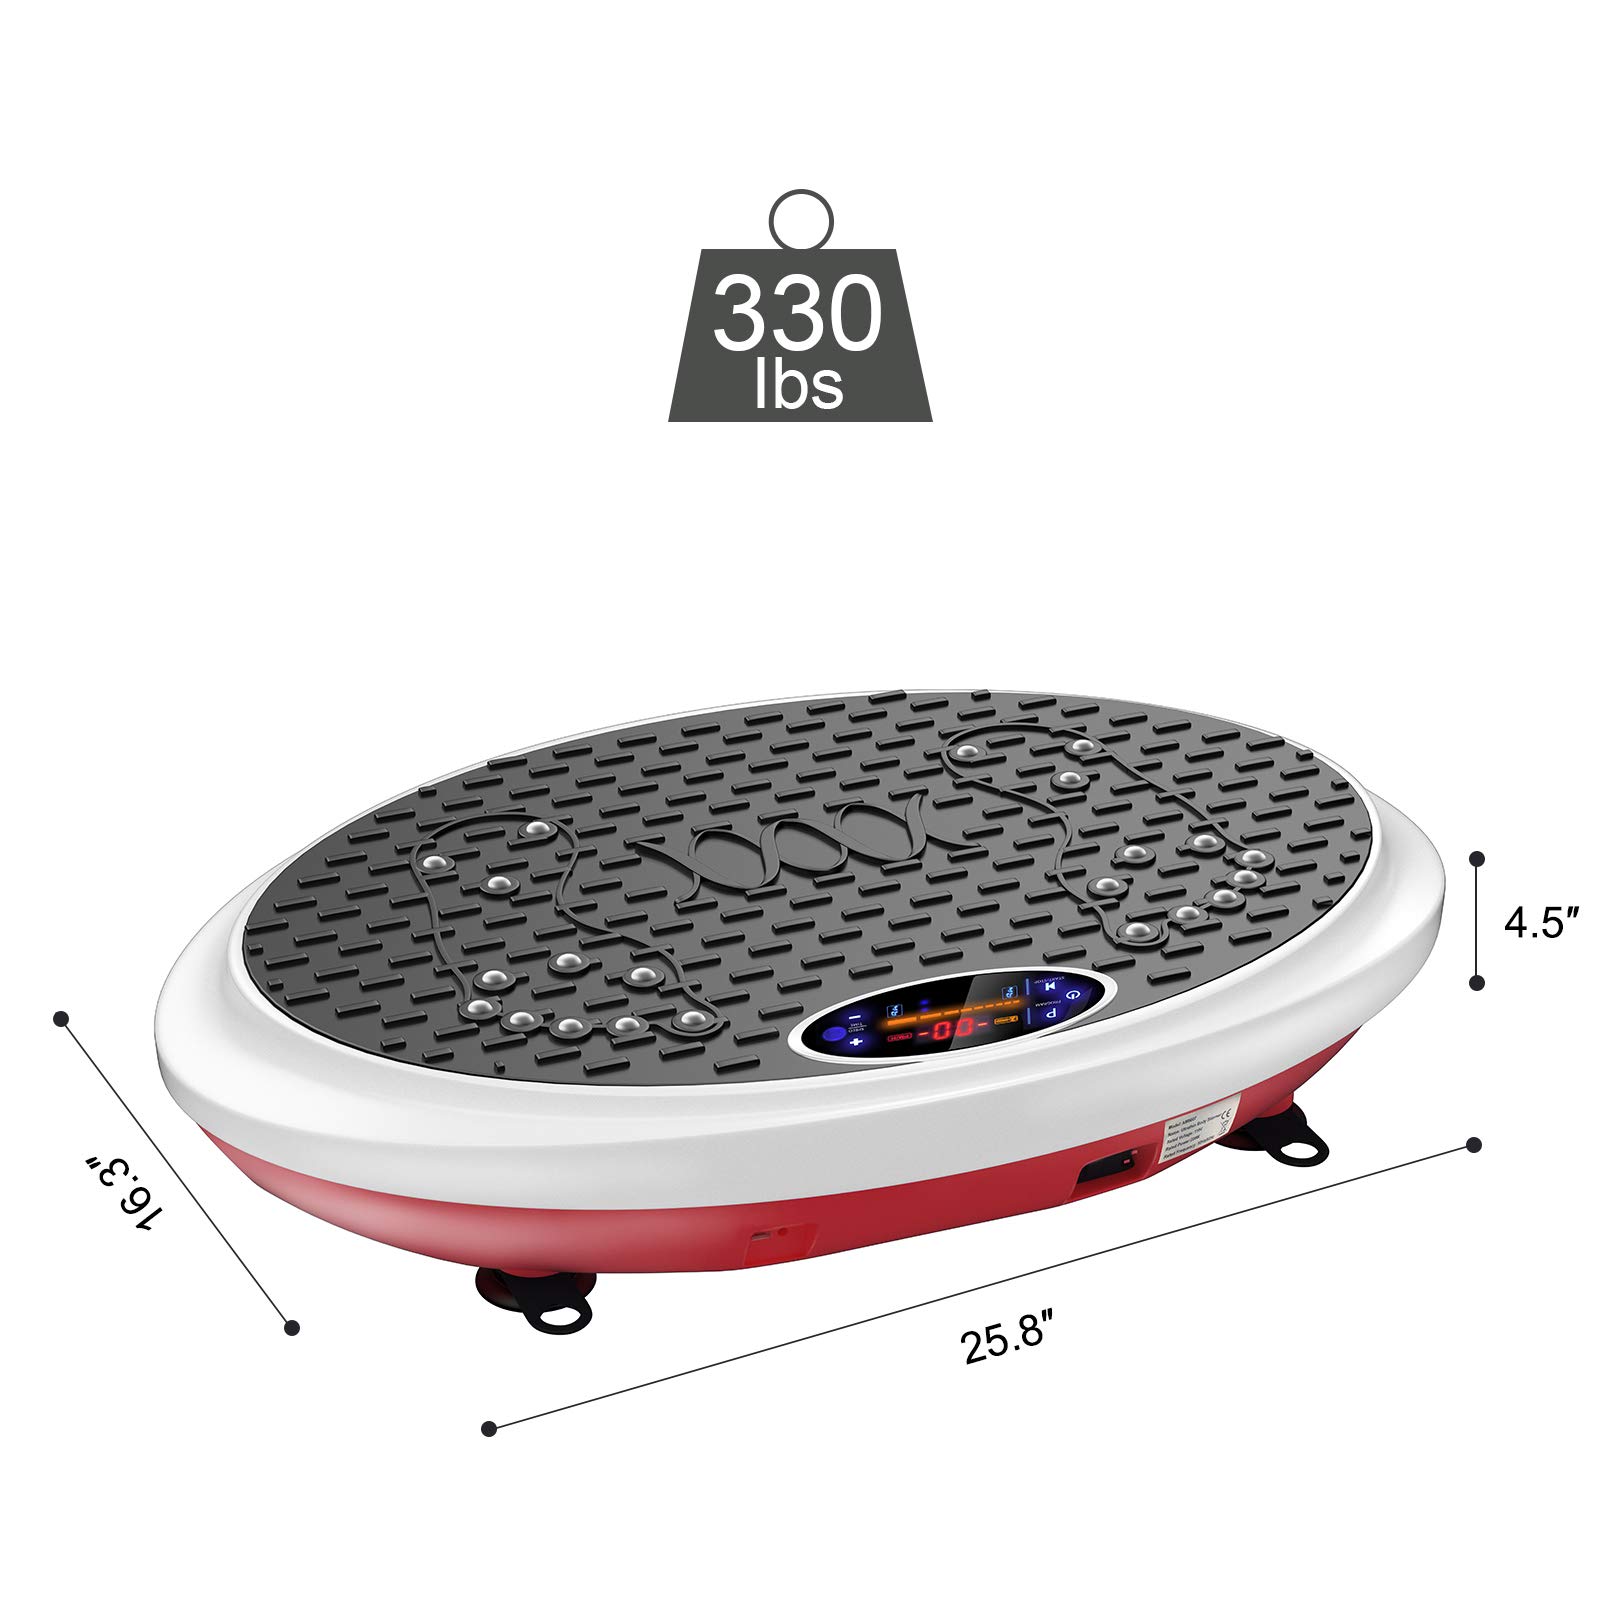 Real Relax Vibration Plate Exercise Machine Whole Body Workout for Home Strenuous Exercise for Weight Loss & Toning with Resistance Band, Remote Control and Support 330Ibs, Red & White